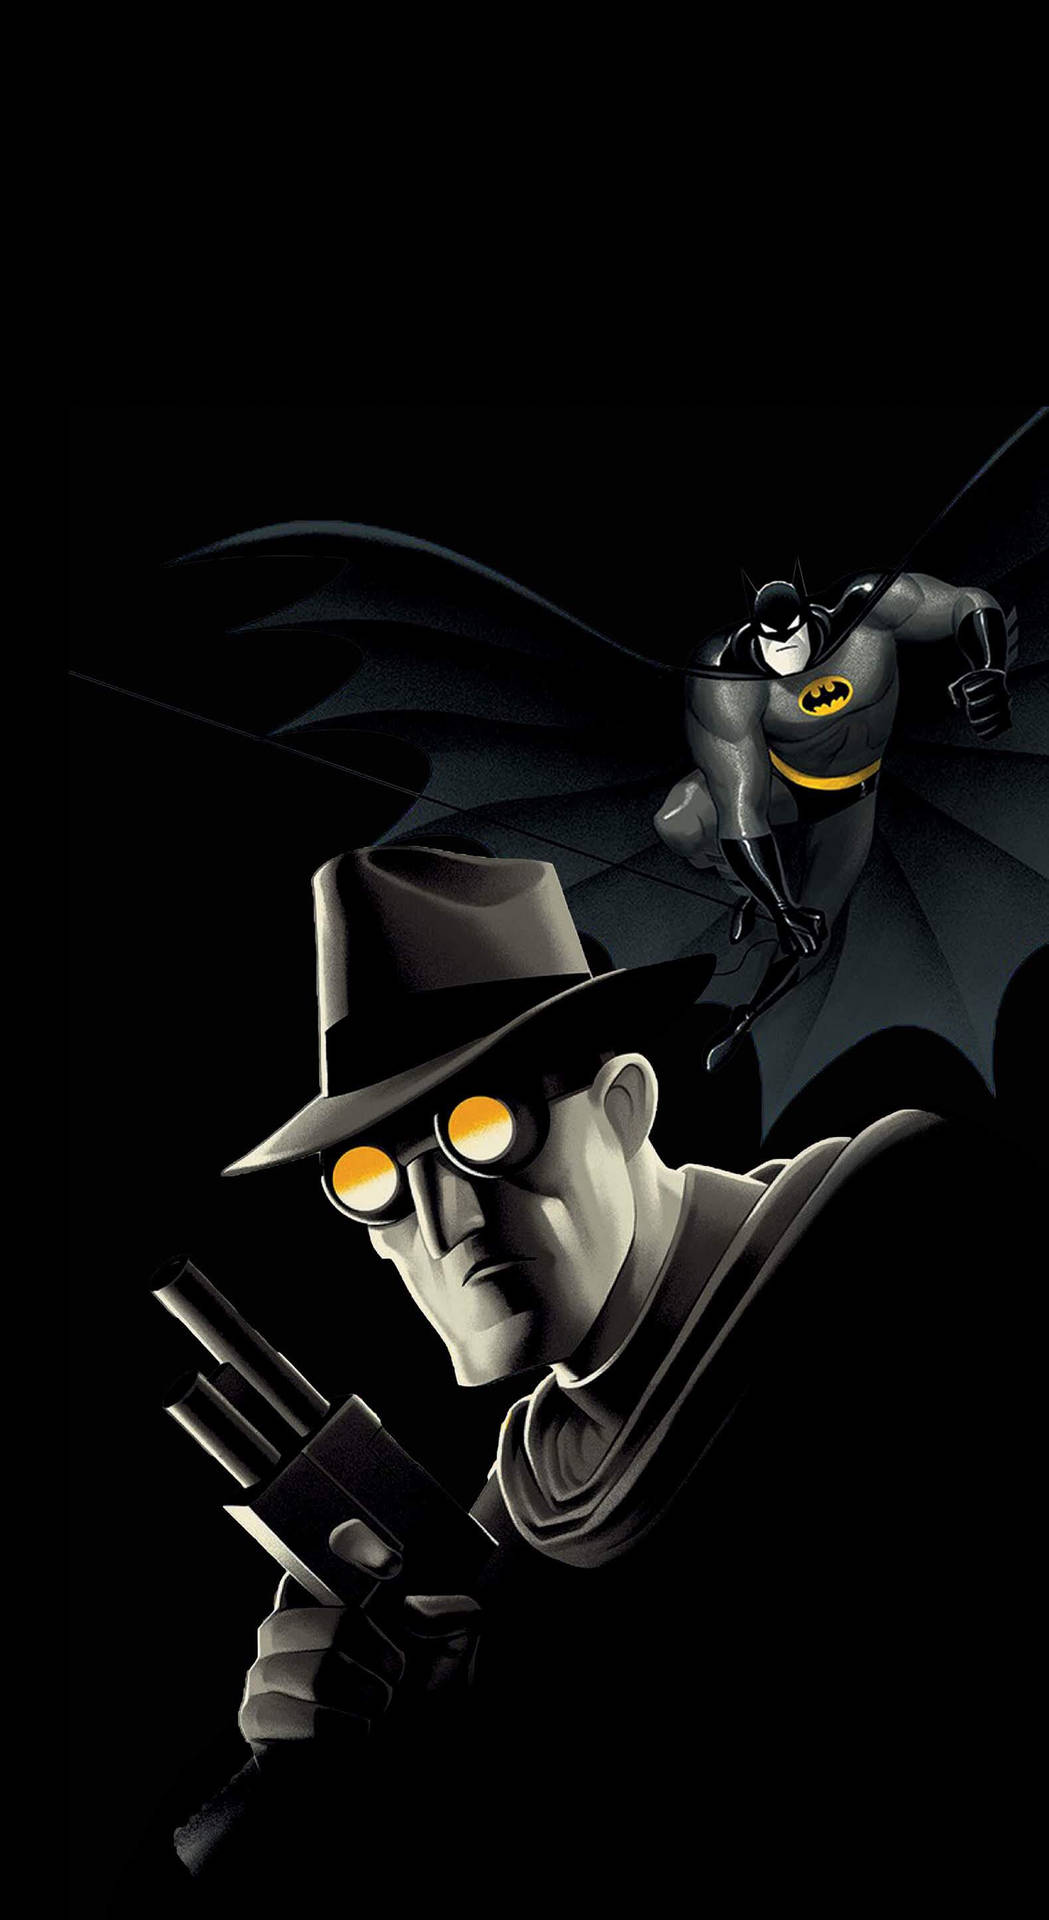 Batman The Animated Series Wallpaper Background